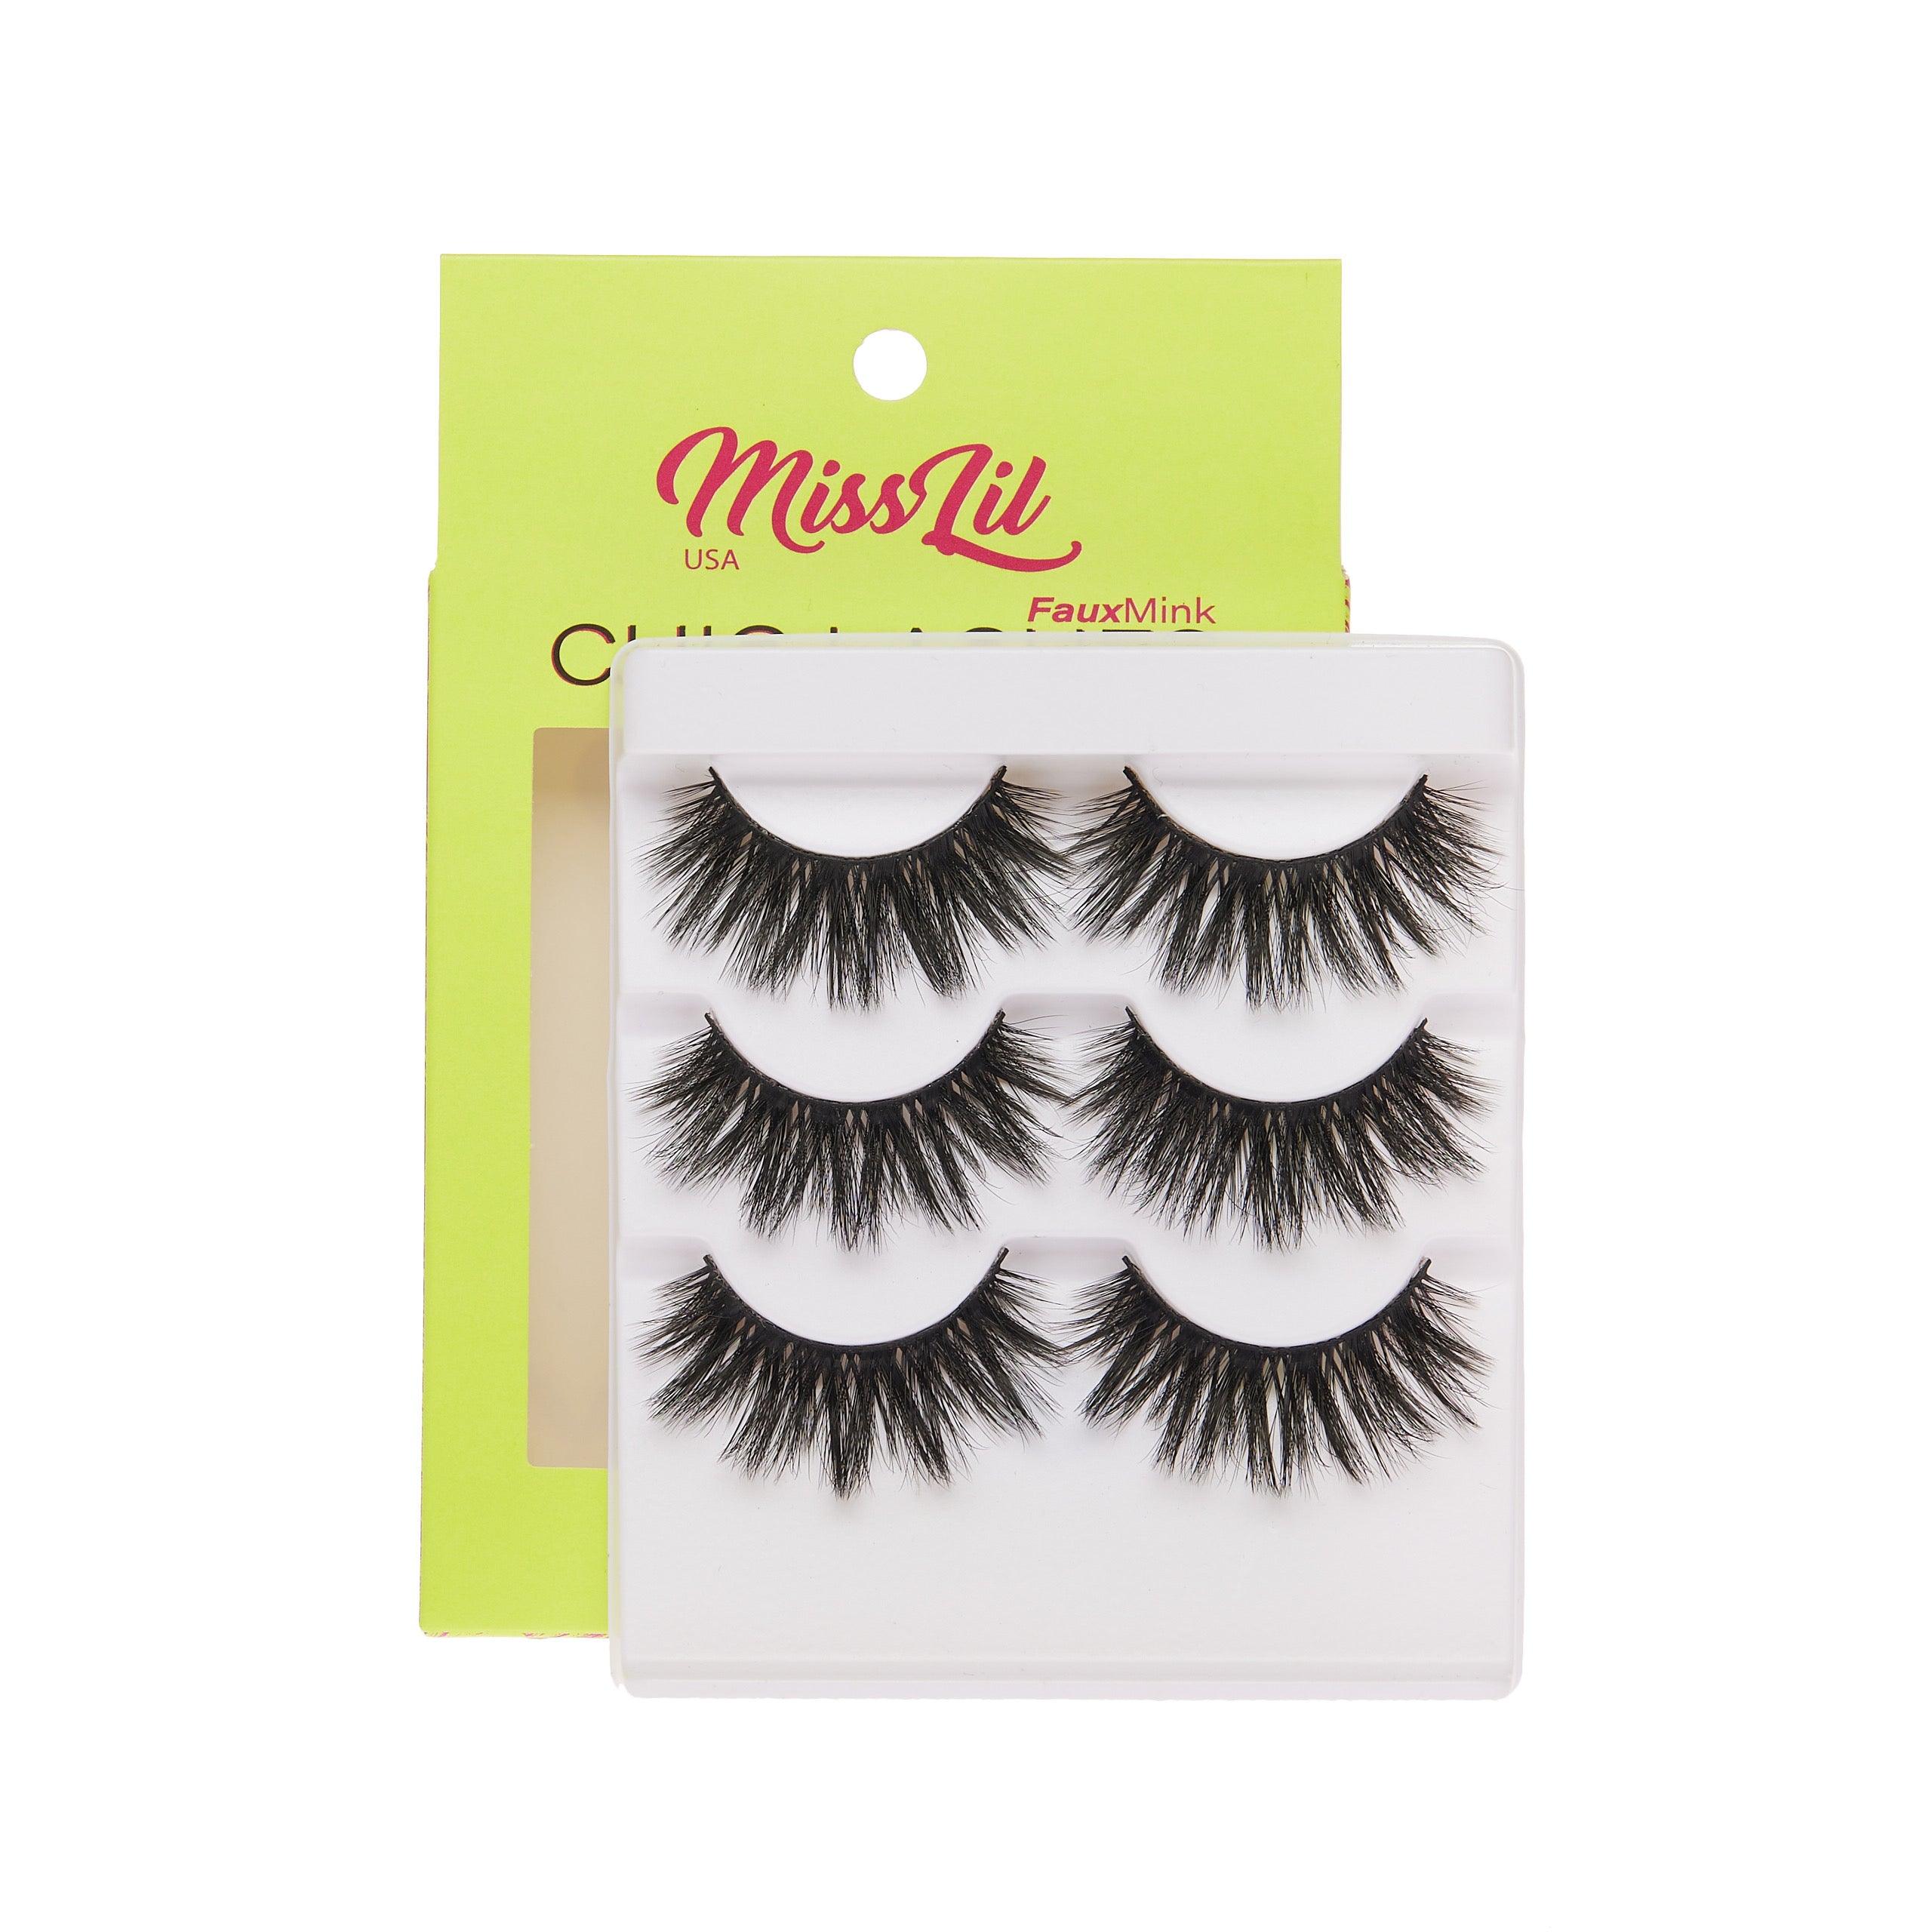 3-Pair Faux Mink Lashes - Chic Lashes Collection #24 - Pack of 3 - Miss Lil USA